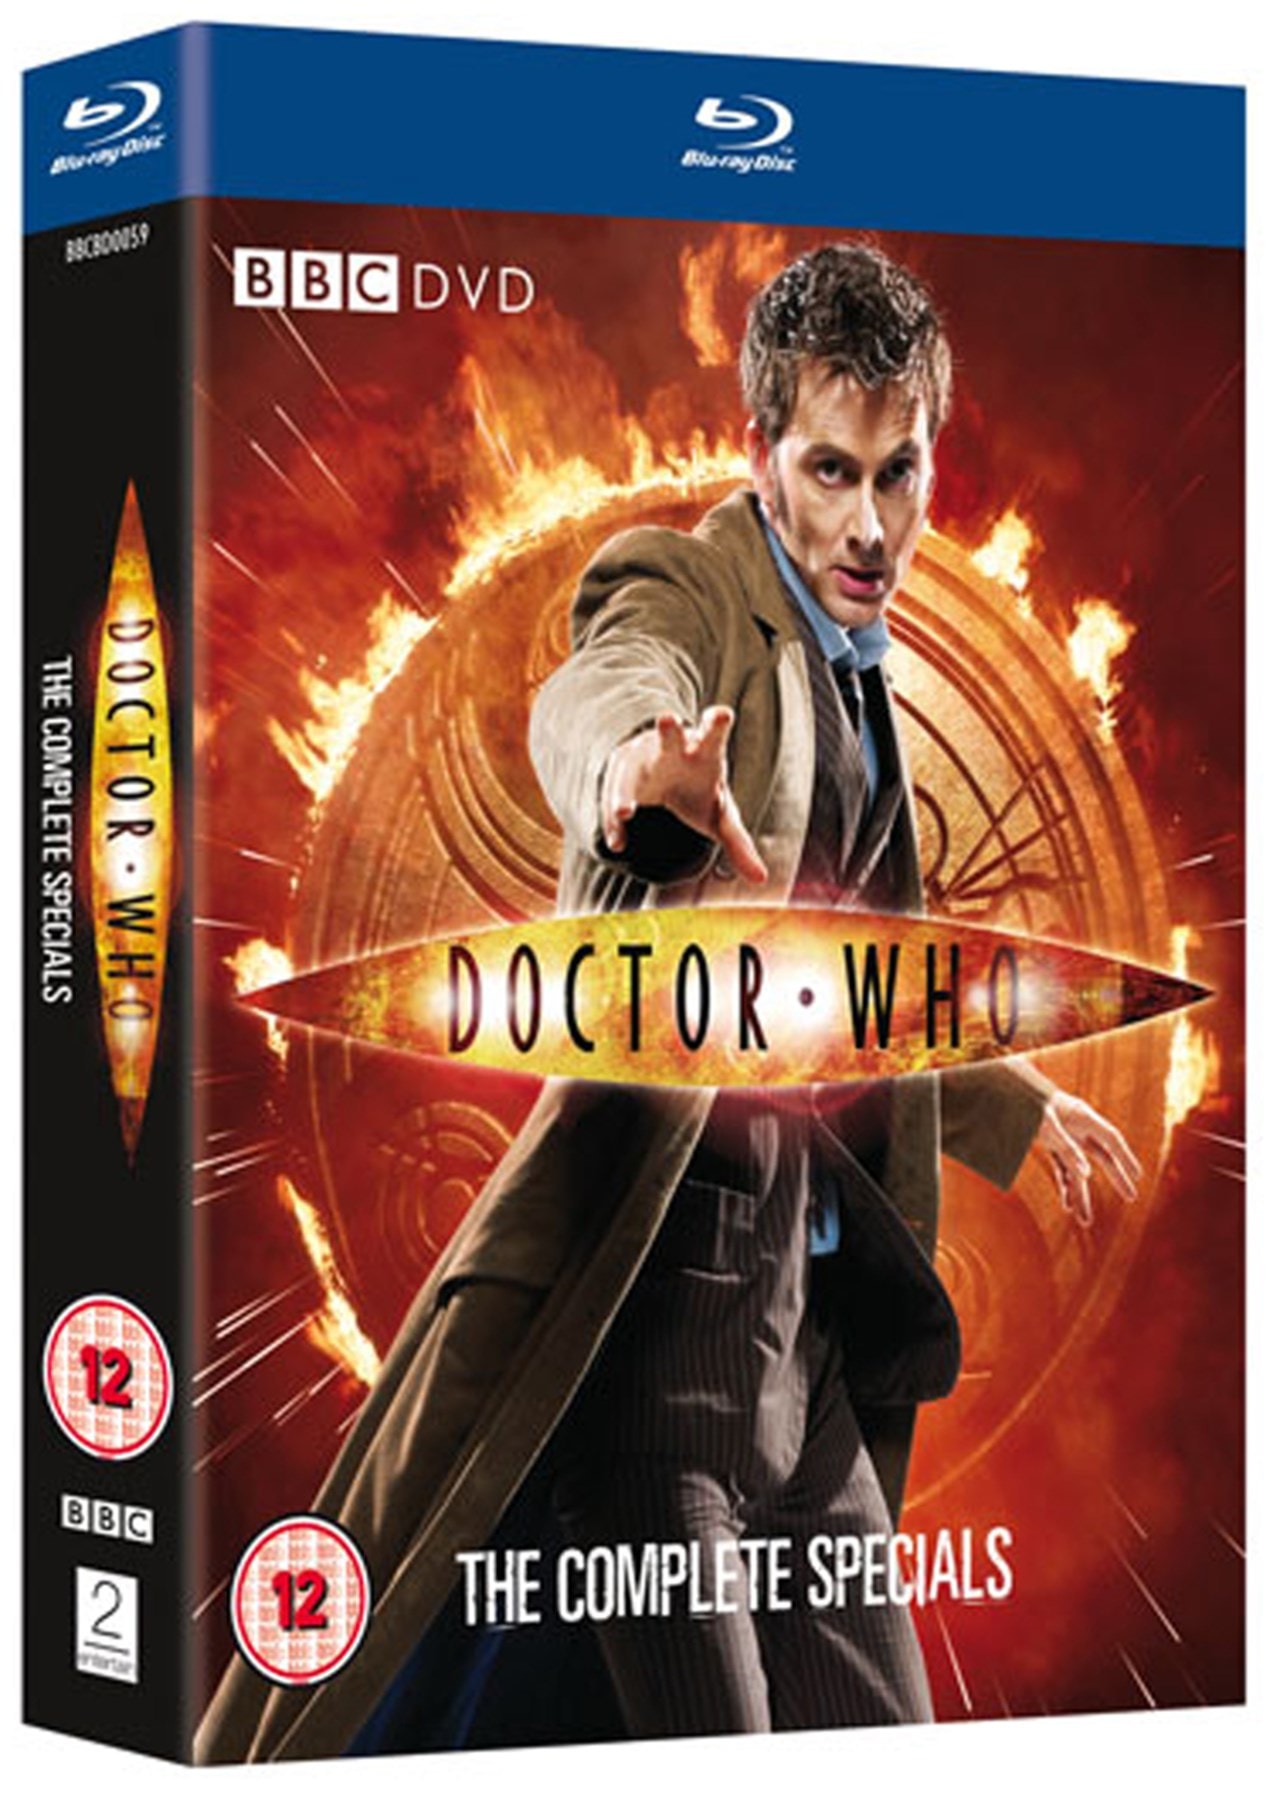 doctor who specials dvd set